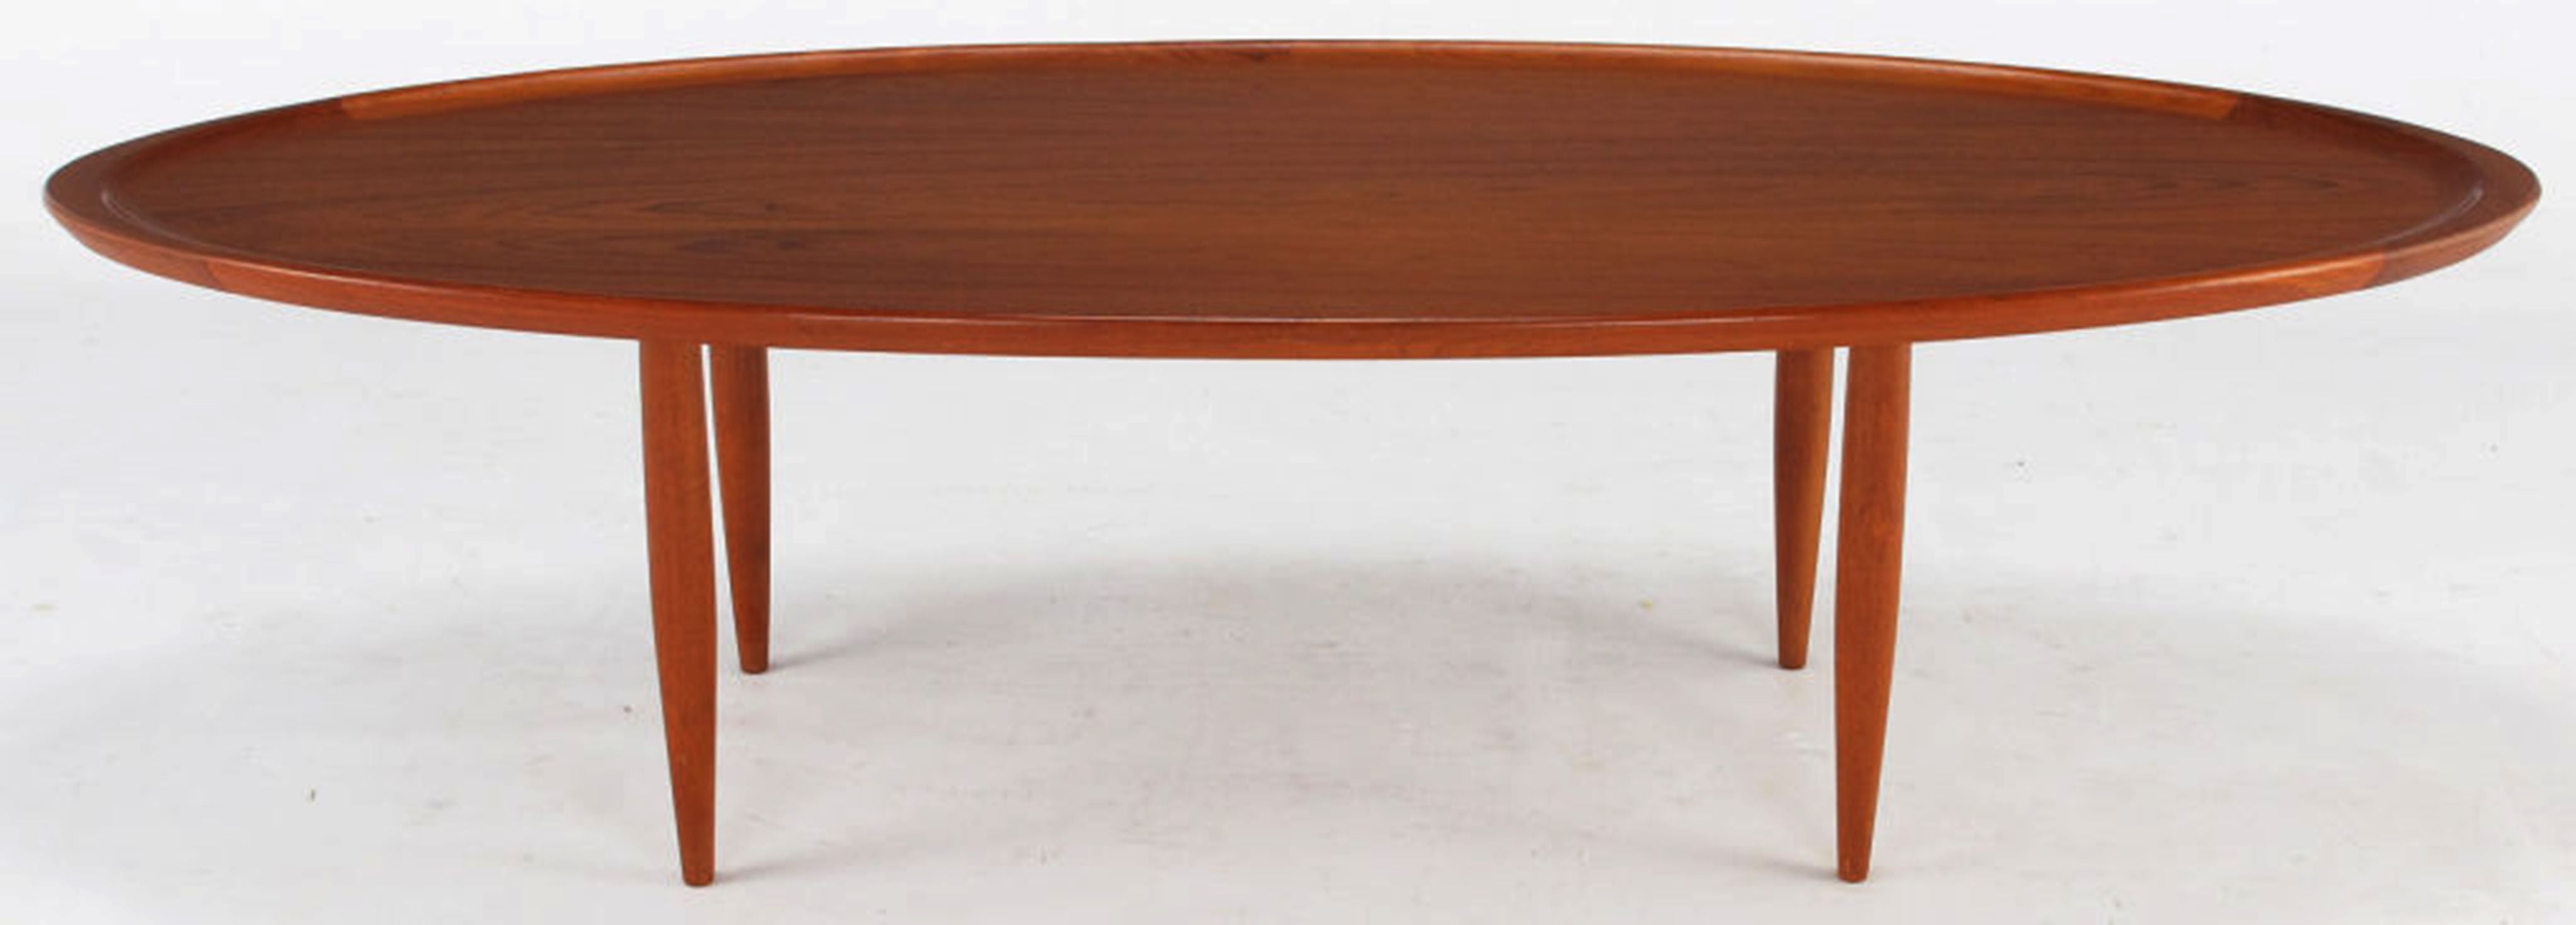 Sculpted Teak Oval Tray Coffee Table For Sale